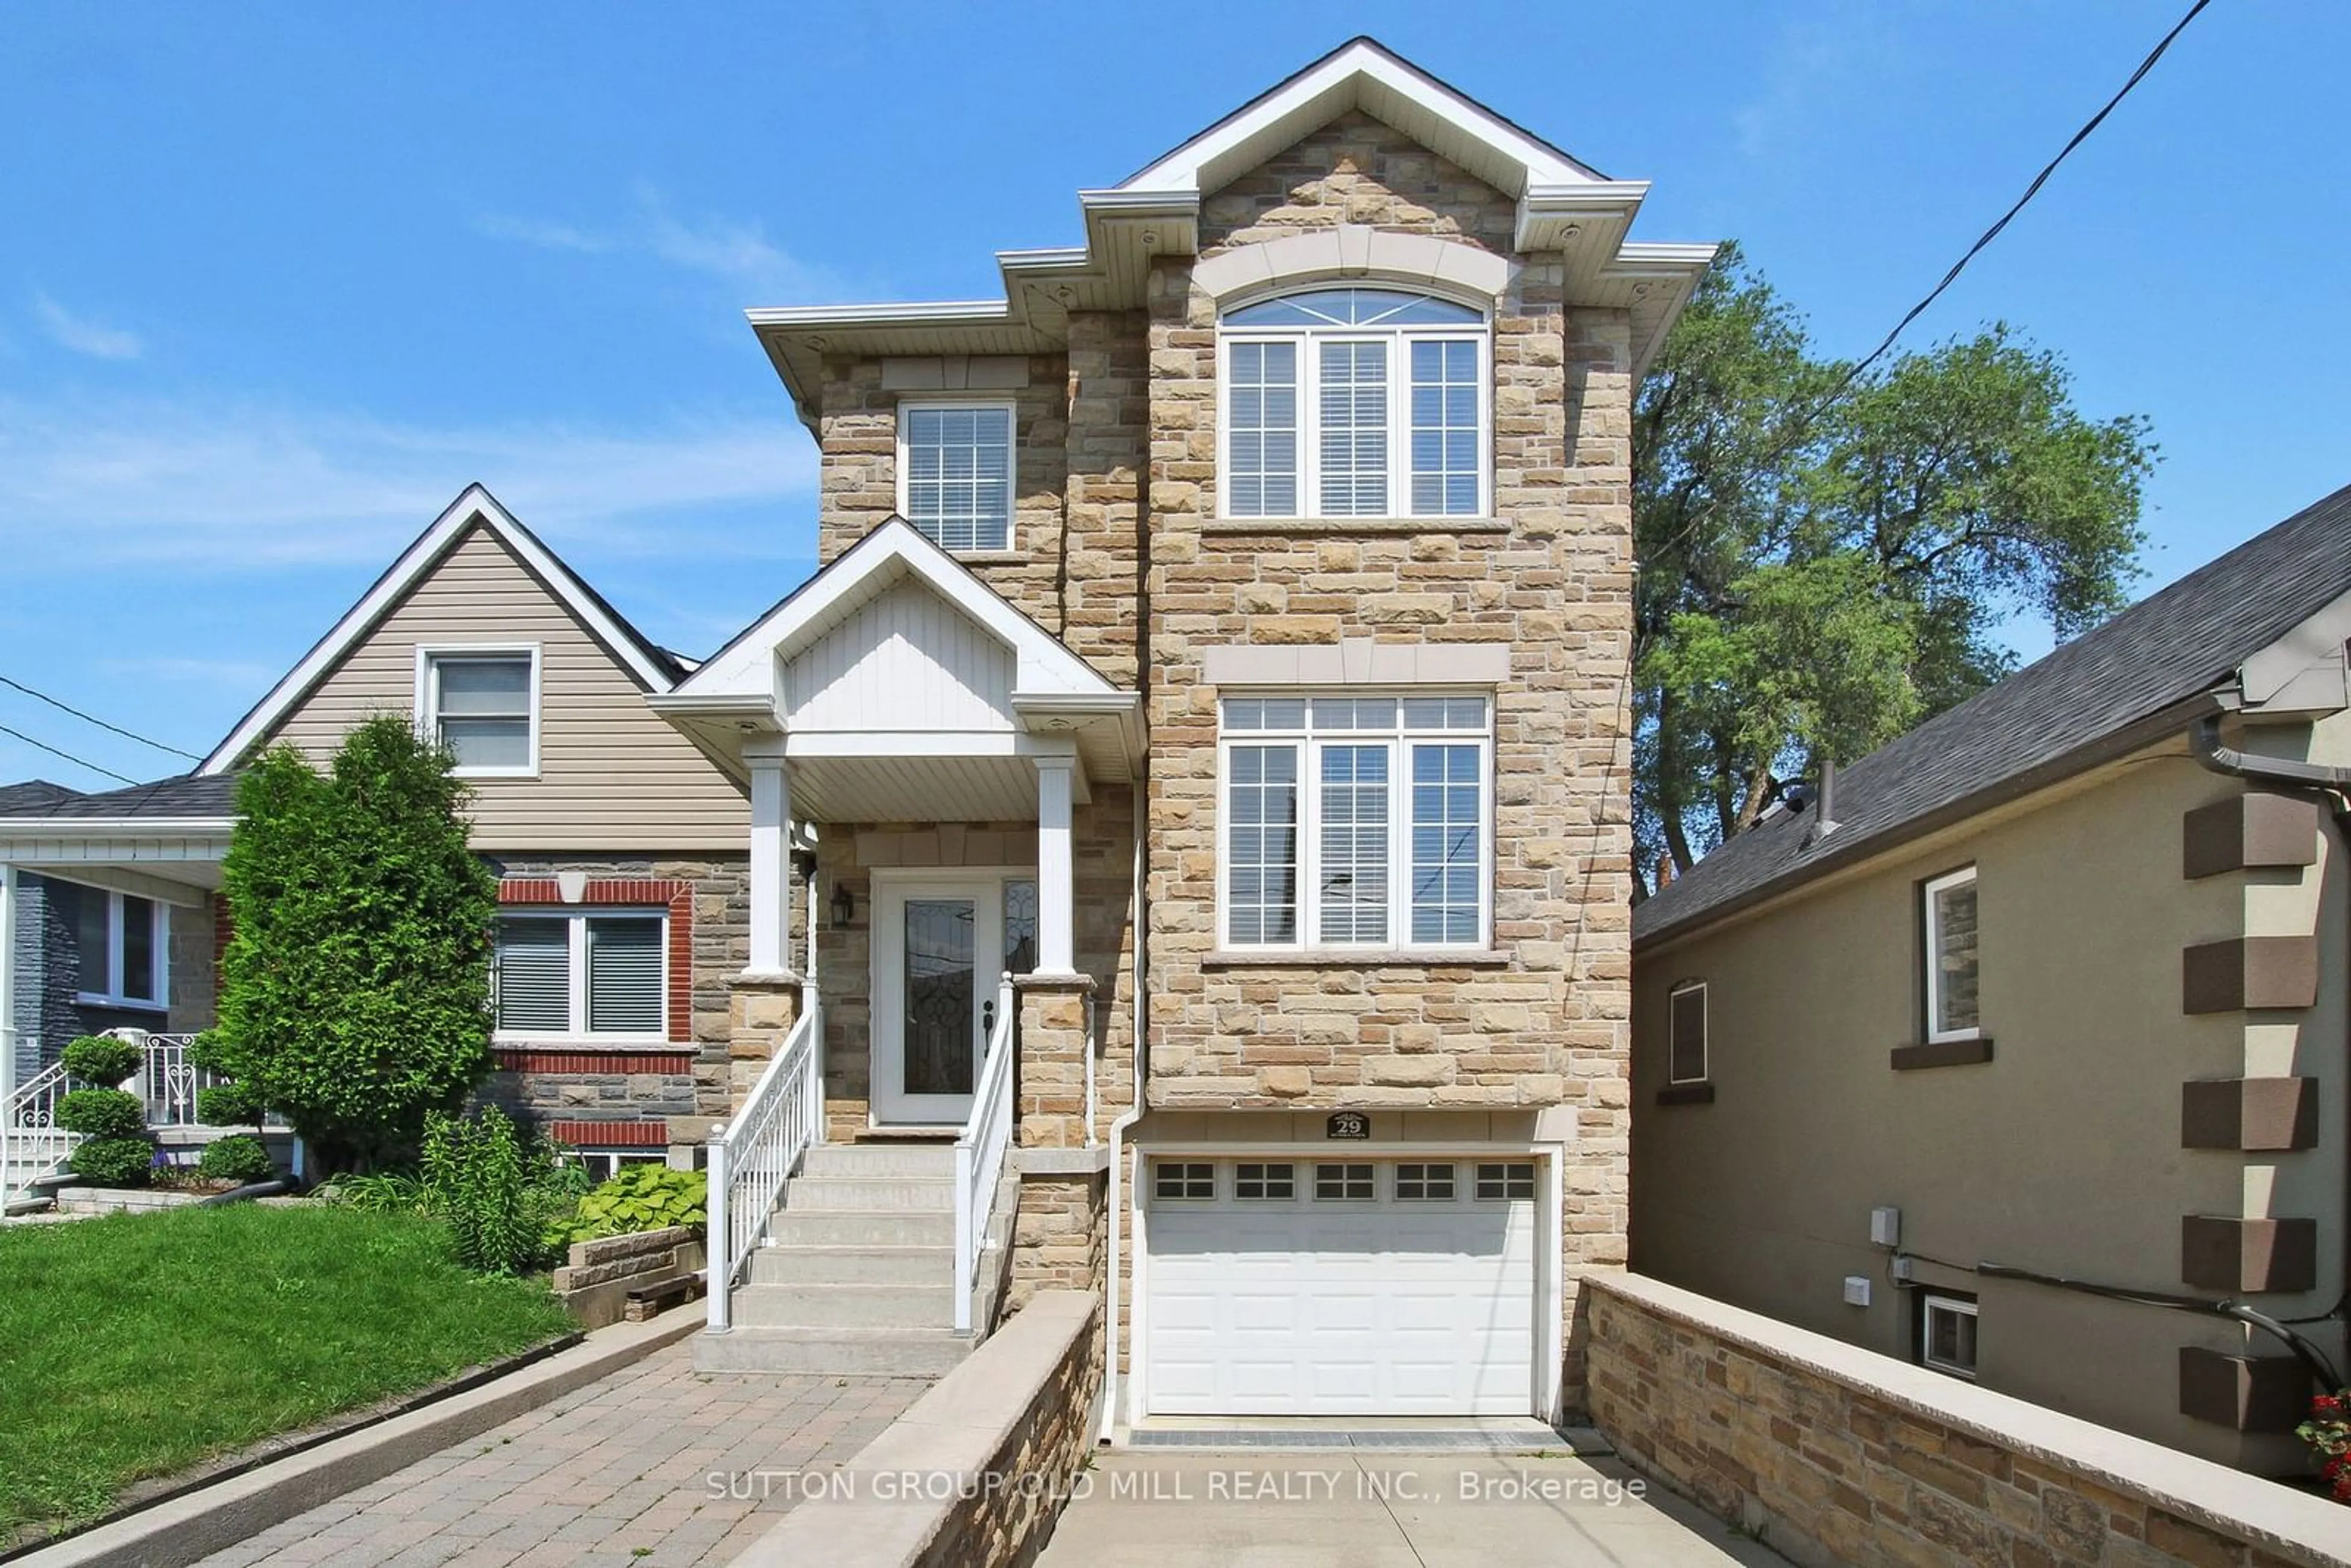 Home with brick exterior material for 29 Kenora Cres, Toronto Ontario M6M 1C5